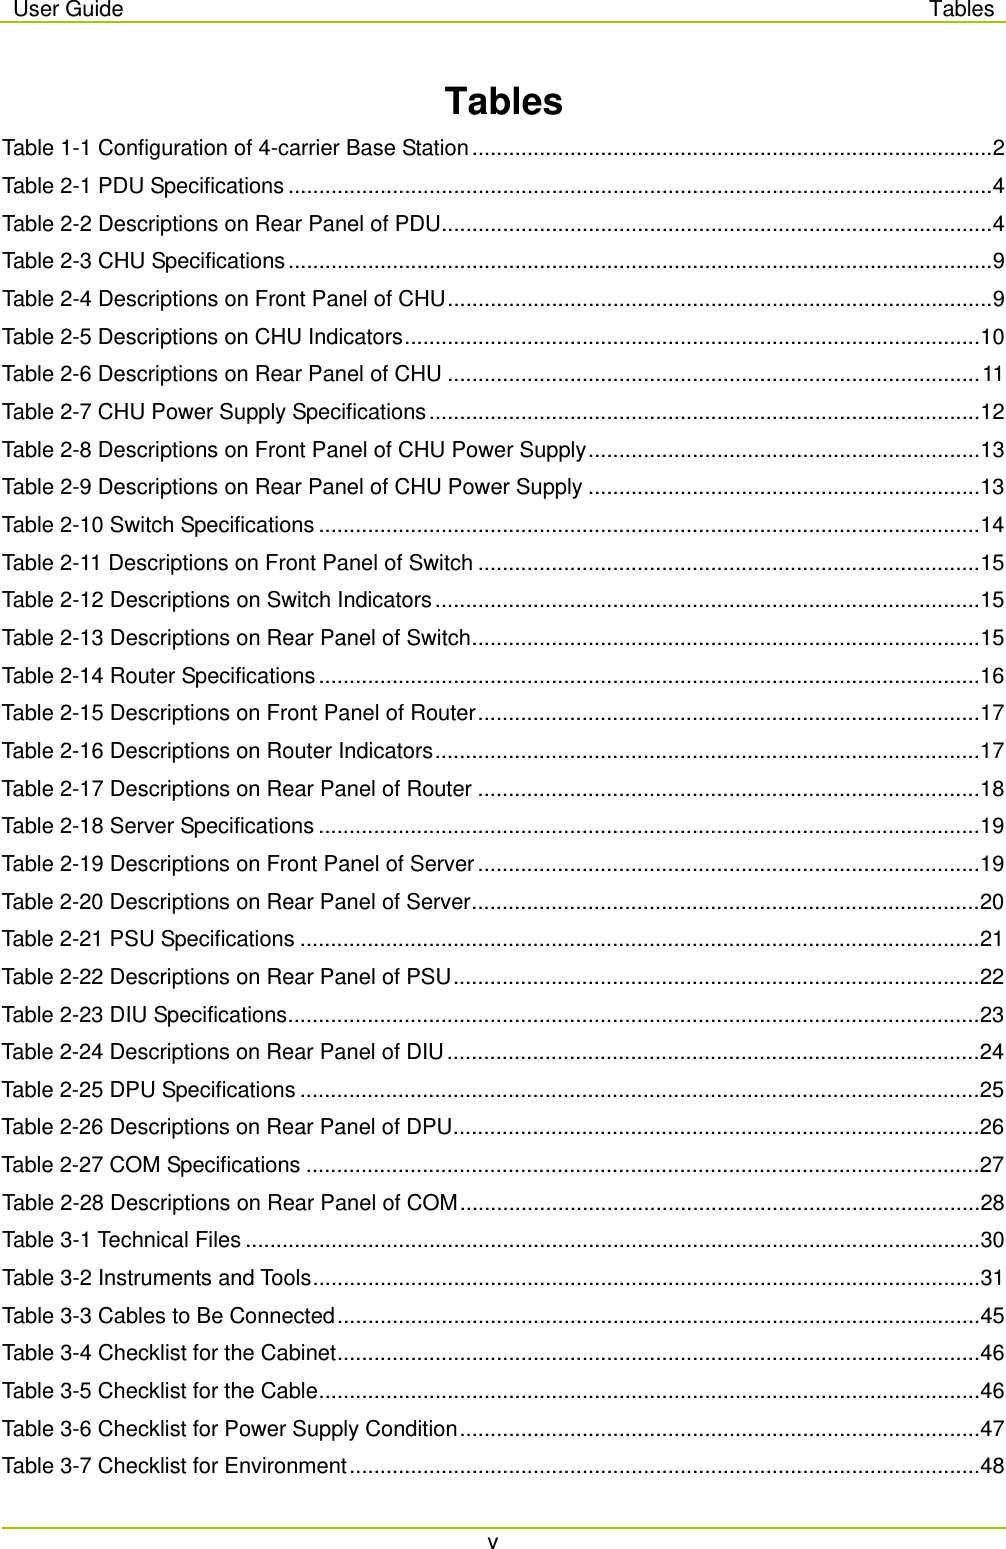 User Guide Tables  v  Tables Table 1-1 Configuration of 4-carrier Base Station ..................................................................................... 2 Table 2-1 PDU Specifications ................................................................................................................... 4 Table 2-2 Descriptions on Rear Panel of PDU .......................................................................................... 4 Table 2-3 CHU Specifications ................................................................................................................... 9 Table 2-4 Descriptions on Front Panel of CHU ......................................................................................... 9 Table 2-5 Descriptions on CHU Indicators .............................................................................................. 10 Table 2-6 Descriptions on Rear Panel of CHU ....................................................................................... 11 Table 2-7 CHU Power Supply Specifications .......................................................................................... 12 Table 2-8 Descriptions on Front Panel of CHU Power Supply ................................................................ 13 Table 2-9 Descriptions on Rear Panel of CHU Power Supply ................................................................ 13 Table 2-10 Switch Specifications ............................................................................................................ 14 Table 2-11 Descriptions on Front Panel of Switch .................................................................................. 15 Table 2-12 Descriptions on Switch Indicators ......................................................................................... 15 Table 2-13 Descriptions on Rear Panel of Switch ................................................................................... 15 Table 2-14 Router Specifications ............................................................................................................ 16 Table 2-15 Descriptions on Front Panel of Router .................................................................................. 17 Table 2-16 Descriptions on Router Indicators ......................................................................................... 17 Table 2-17 Descriptions on Rear Panel of Router .................................................................................. 18 Table 2-18 Server Specifications ............................................................................................................ 19 Table 2-19 Descriptions on Front Panel of Server .................................................................................. 19 Table 2-20 Descriptions on Rear Panel of Server ................................................................................... 20 Table 2-21 PSU Specifications ............................................................................................................... 21 Table 2-22 Descriptions on Rear Panel of PSU ...................................................................................... 22 Table 2-23 DIU Specifications ................................................................................................................. 23 Table 2-24 Descriptions on Rear Panel of DIU ....................................................................................... 24 Table 2-25 DPU Specifications ............................................................................................................... 25 Table 2-26 Descriptions on Rear Panel of DPU ...................................................................................... 26 Table 2-27 COM Specifications .............................................................................................................. 27 Table 2-28 Descriptions on Rear Panel of COM ..................................................................................... 28 Table 3-1 Technical Files ........................................................................................................................ 30 Table 3-2 Instruments and Tools ............................................................................................................. 31 Table 3-3 Cables to Be Connected ......................................................................................................... 45 Table 3-4 Checklist for the Cabinet ......................................................................................................... 46 Table 3-5 Checklist for the Cable ............................................................................................................ 46 Table 3-6 Checklist for Power Supply Condition ..................................................................................... 47 Table 3-7 Checklist for Environment ....................................................................................................... 48 